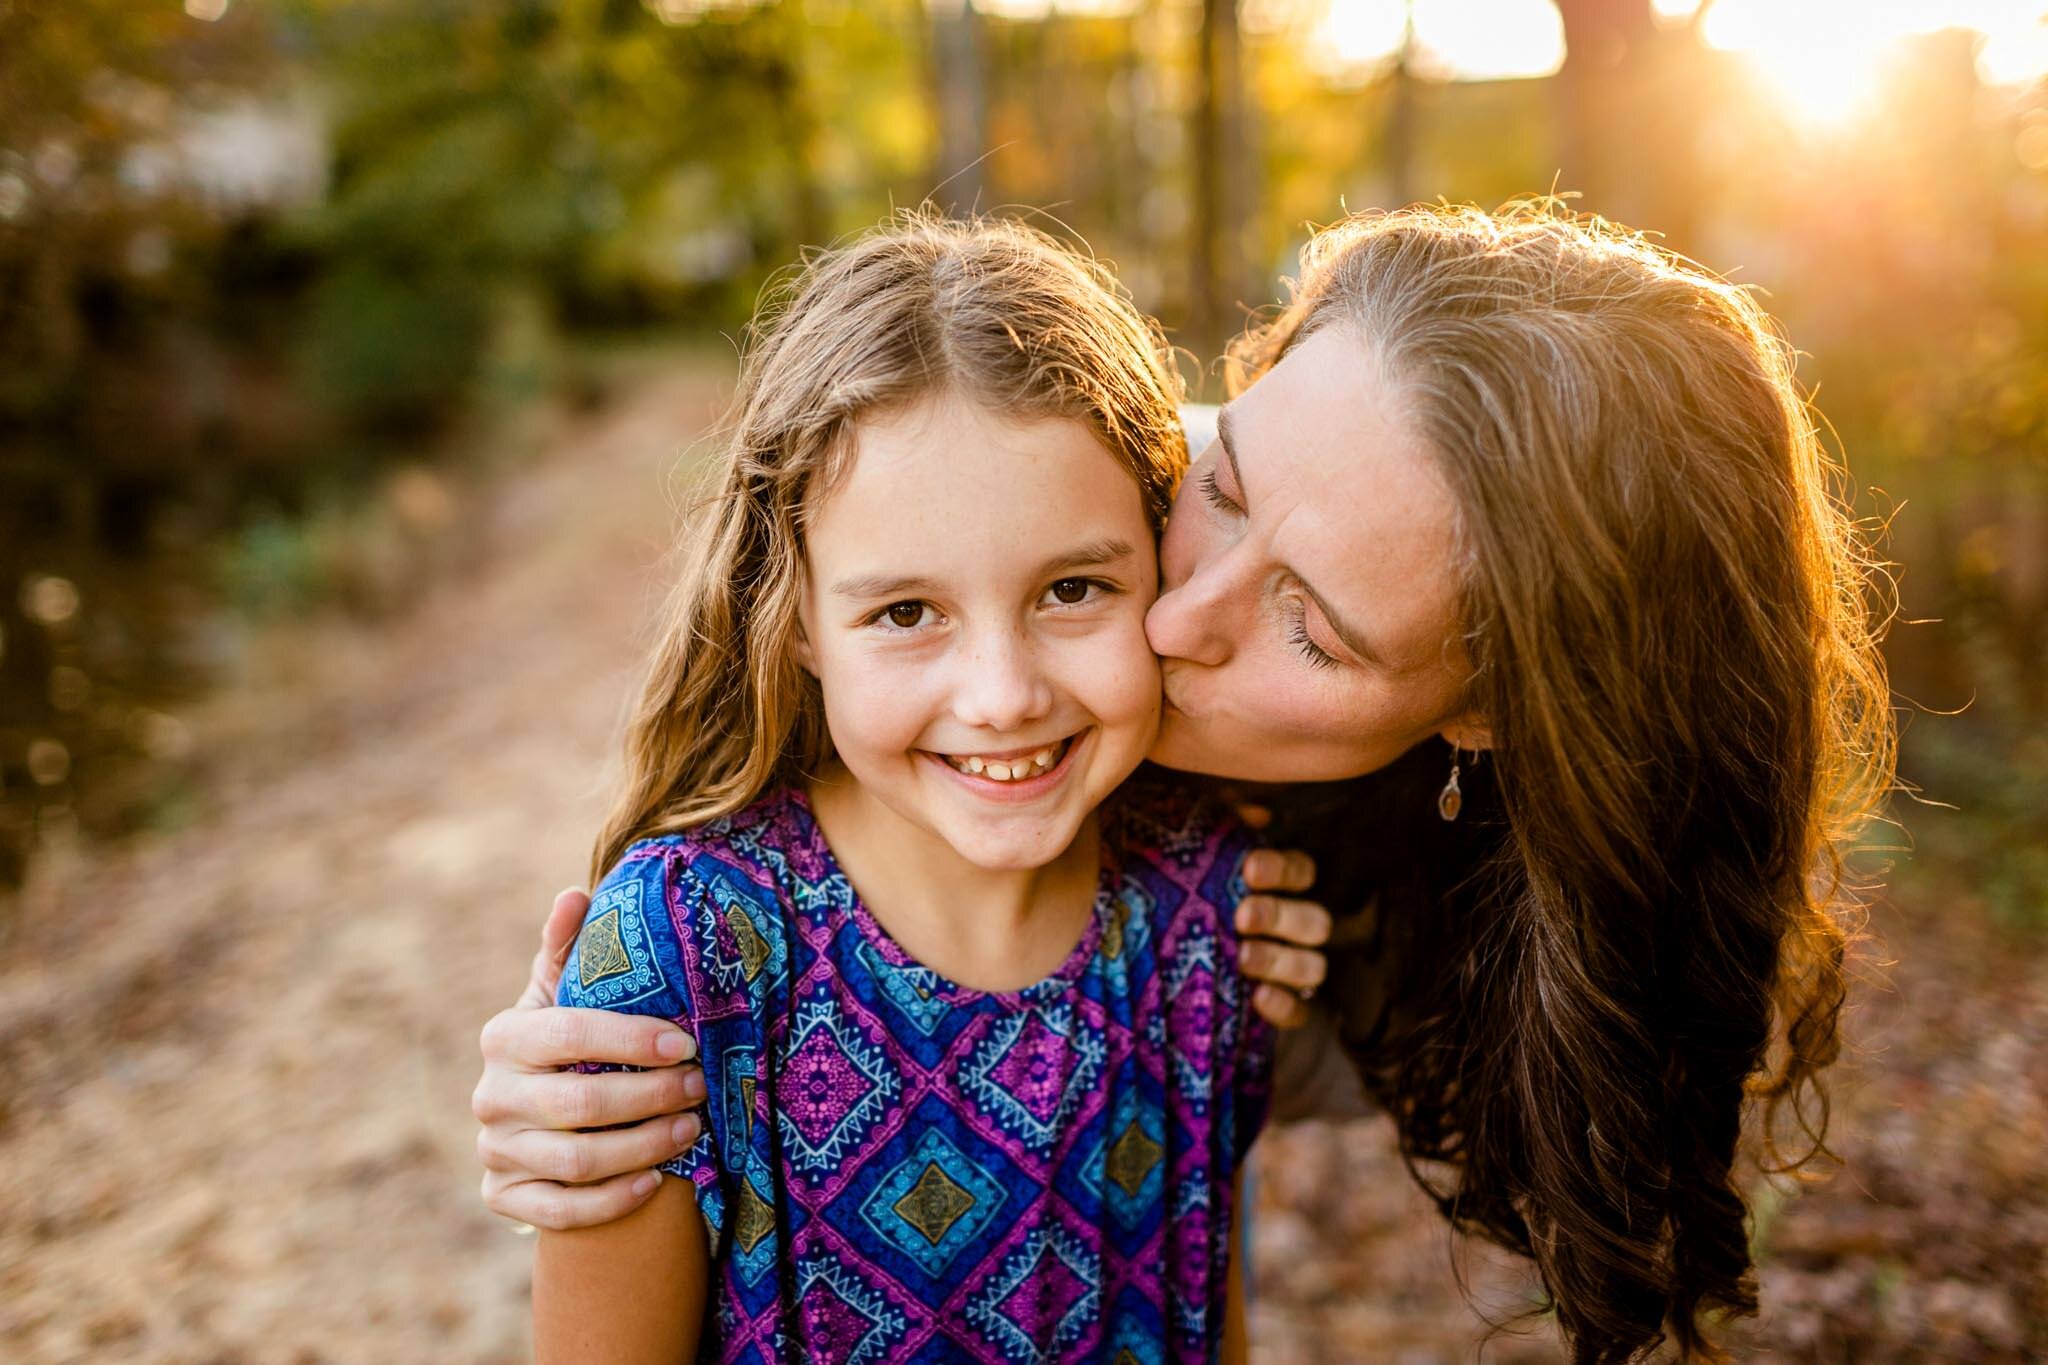 Apex Family Photographer | By G. Lin Photography | Mother kissing daughter on cheek with golden light behind them